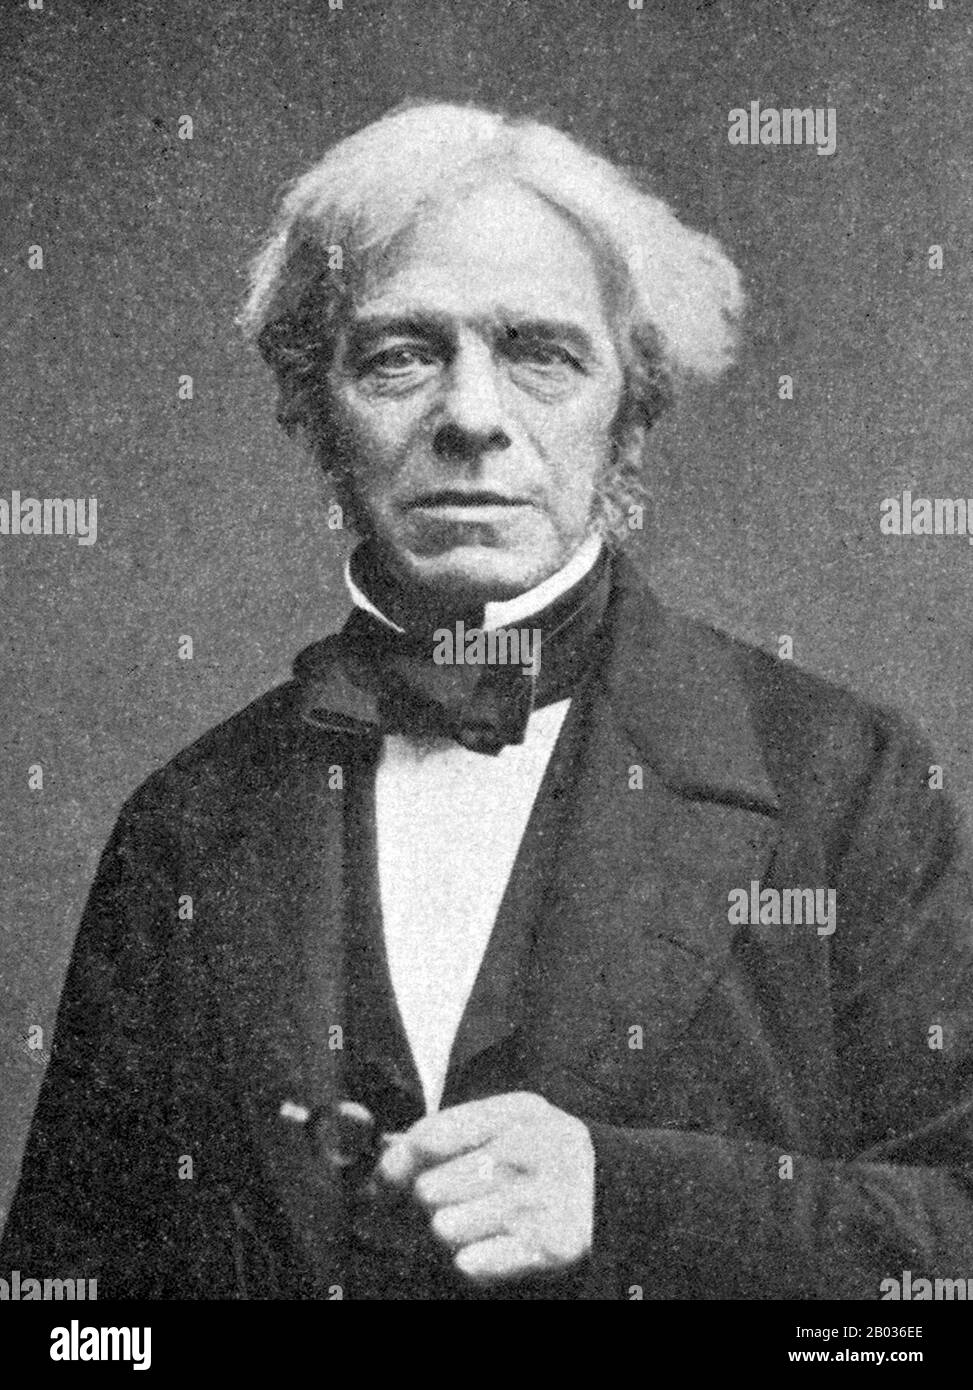 Michael Faraday FRS (22 September 1791 – 25 August 1867) was an English scientist who contributed to the study of electromagnetism and electrochemistry. His main discoveries include the principles underlying electromagnetic induction, diamagnetism and electrolysis.  Although Faraday received little formal education, he was one of the most influential scientists in history. It was by his research on the magnetic field around a conductor carrying a direct current that Faraday established the basis for the concept of the electromagnetic field in physics. Faraday also established that magnetism co Stock Photo